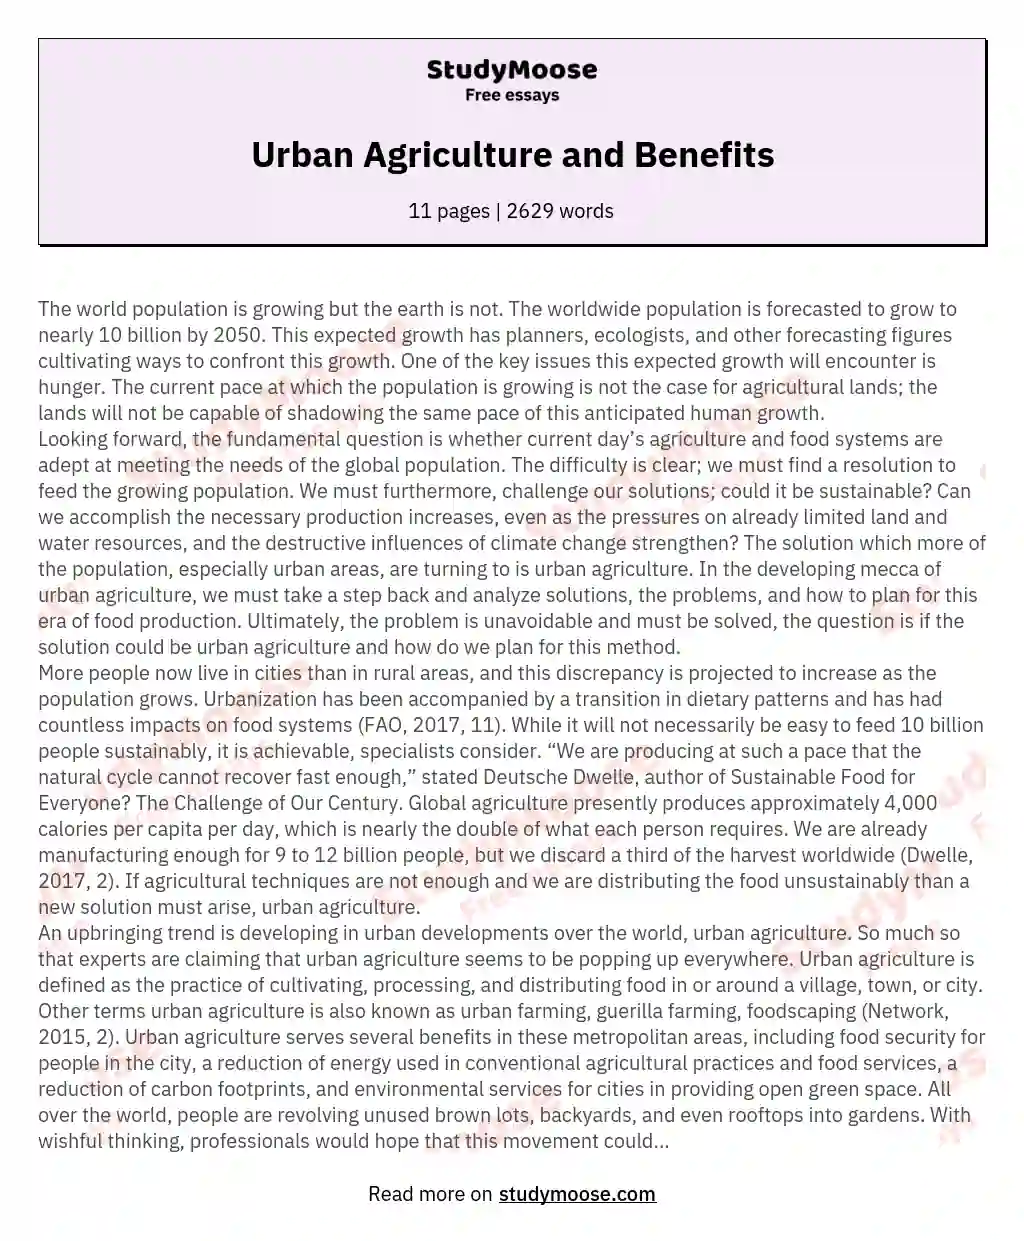 Urban Agriculture and Benefits essay